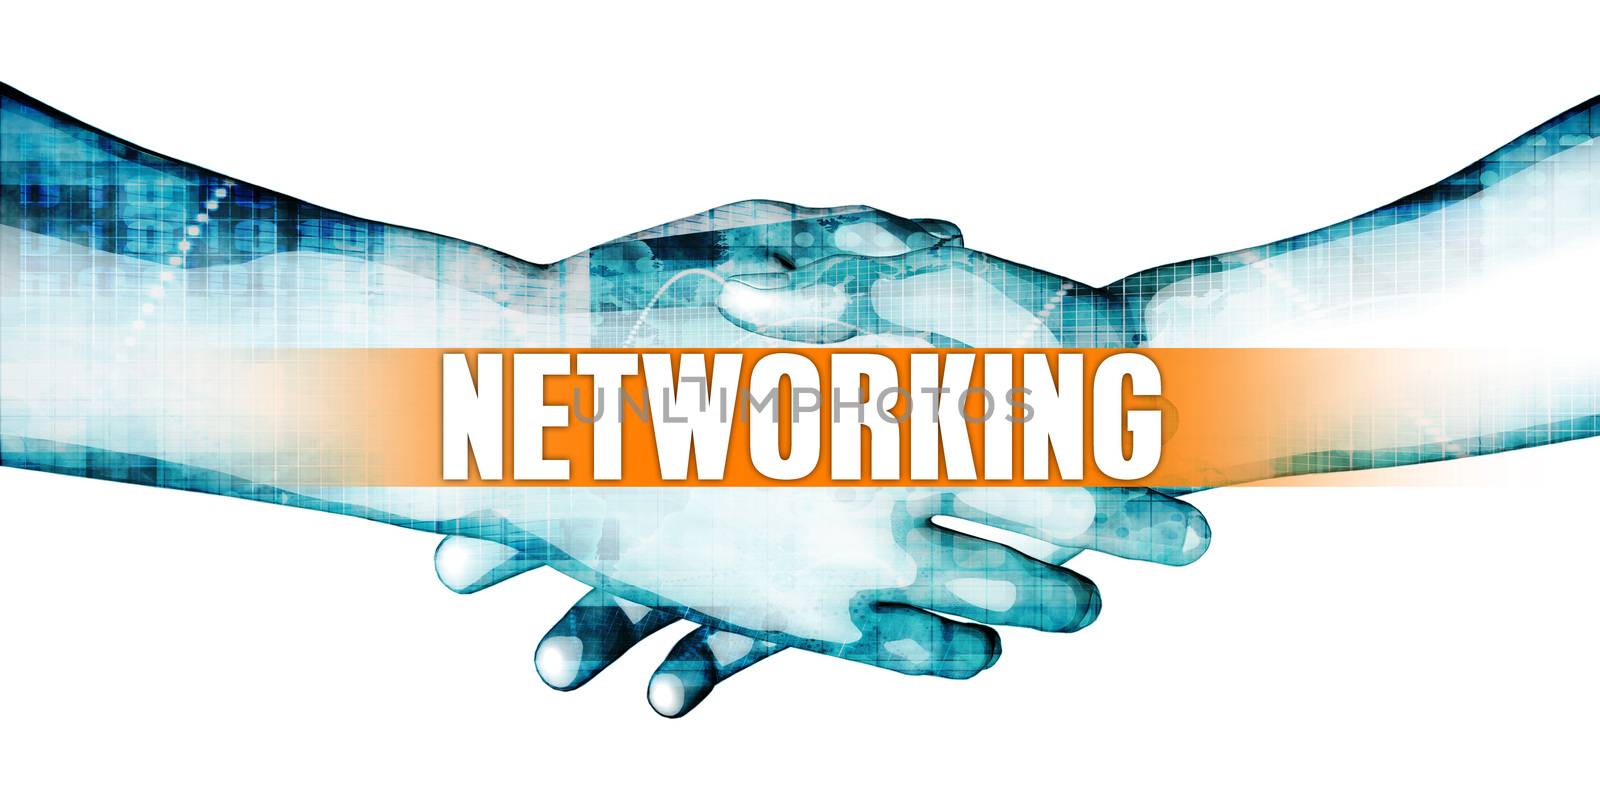 Networking by kentoh